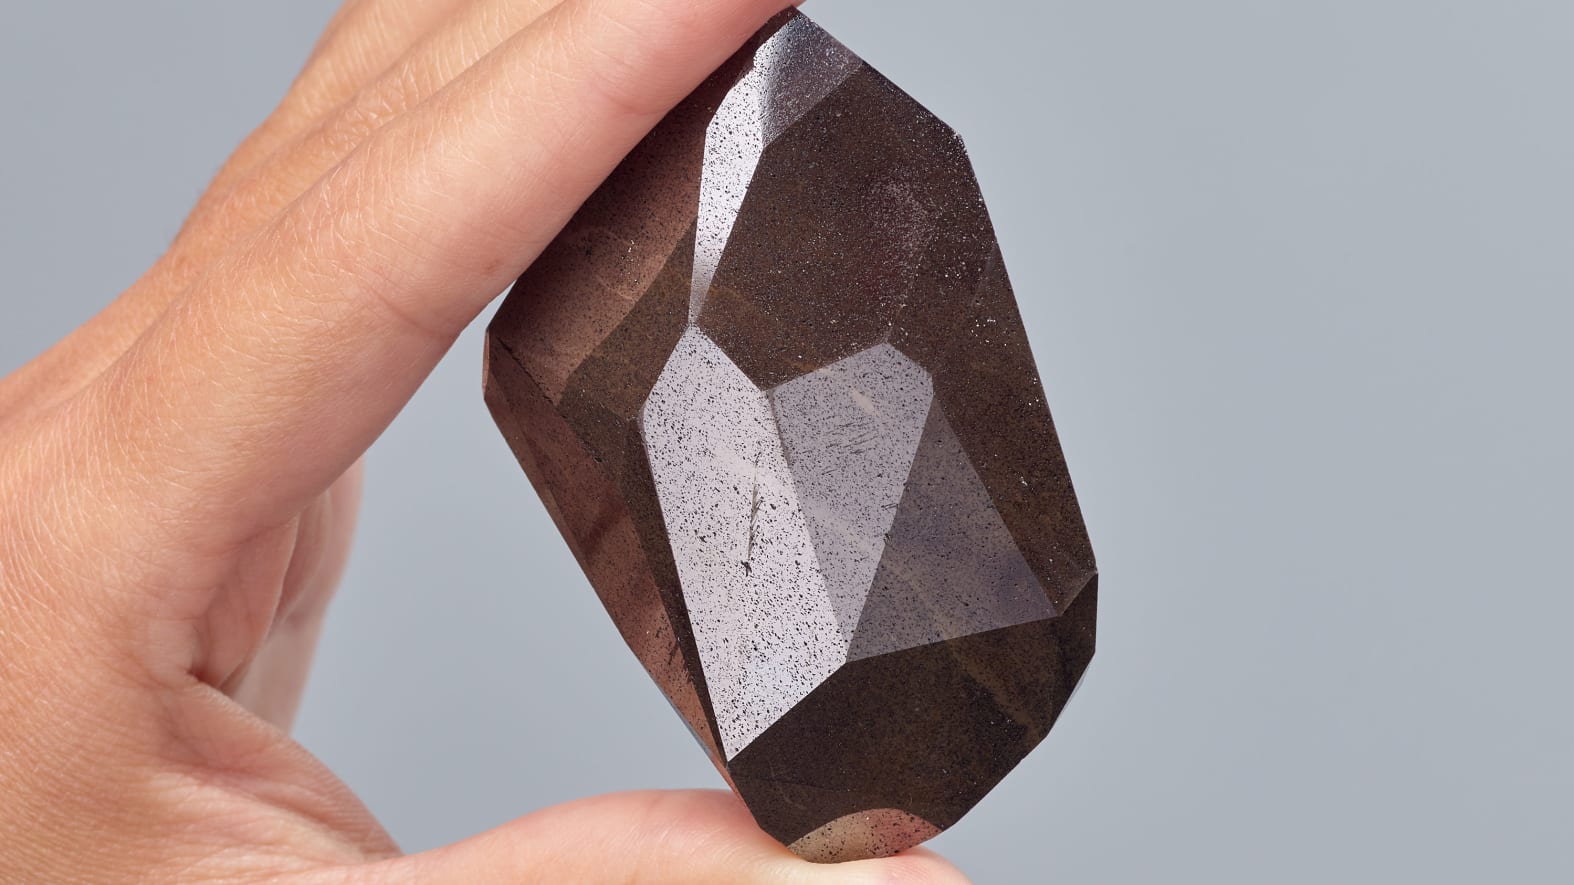 The extremely rare 555.55-carat black diamond, known as "The Enigma" goes to auction.